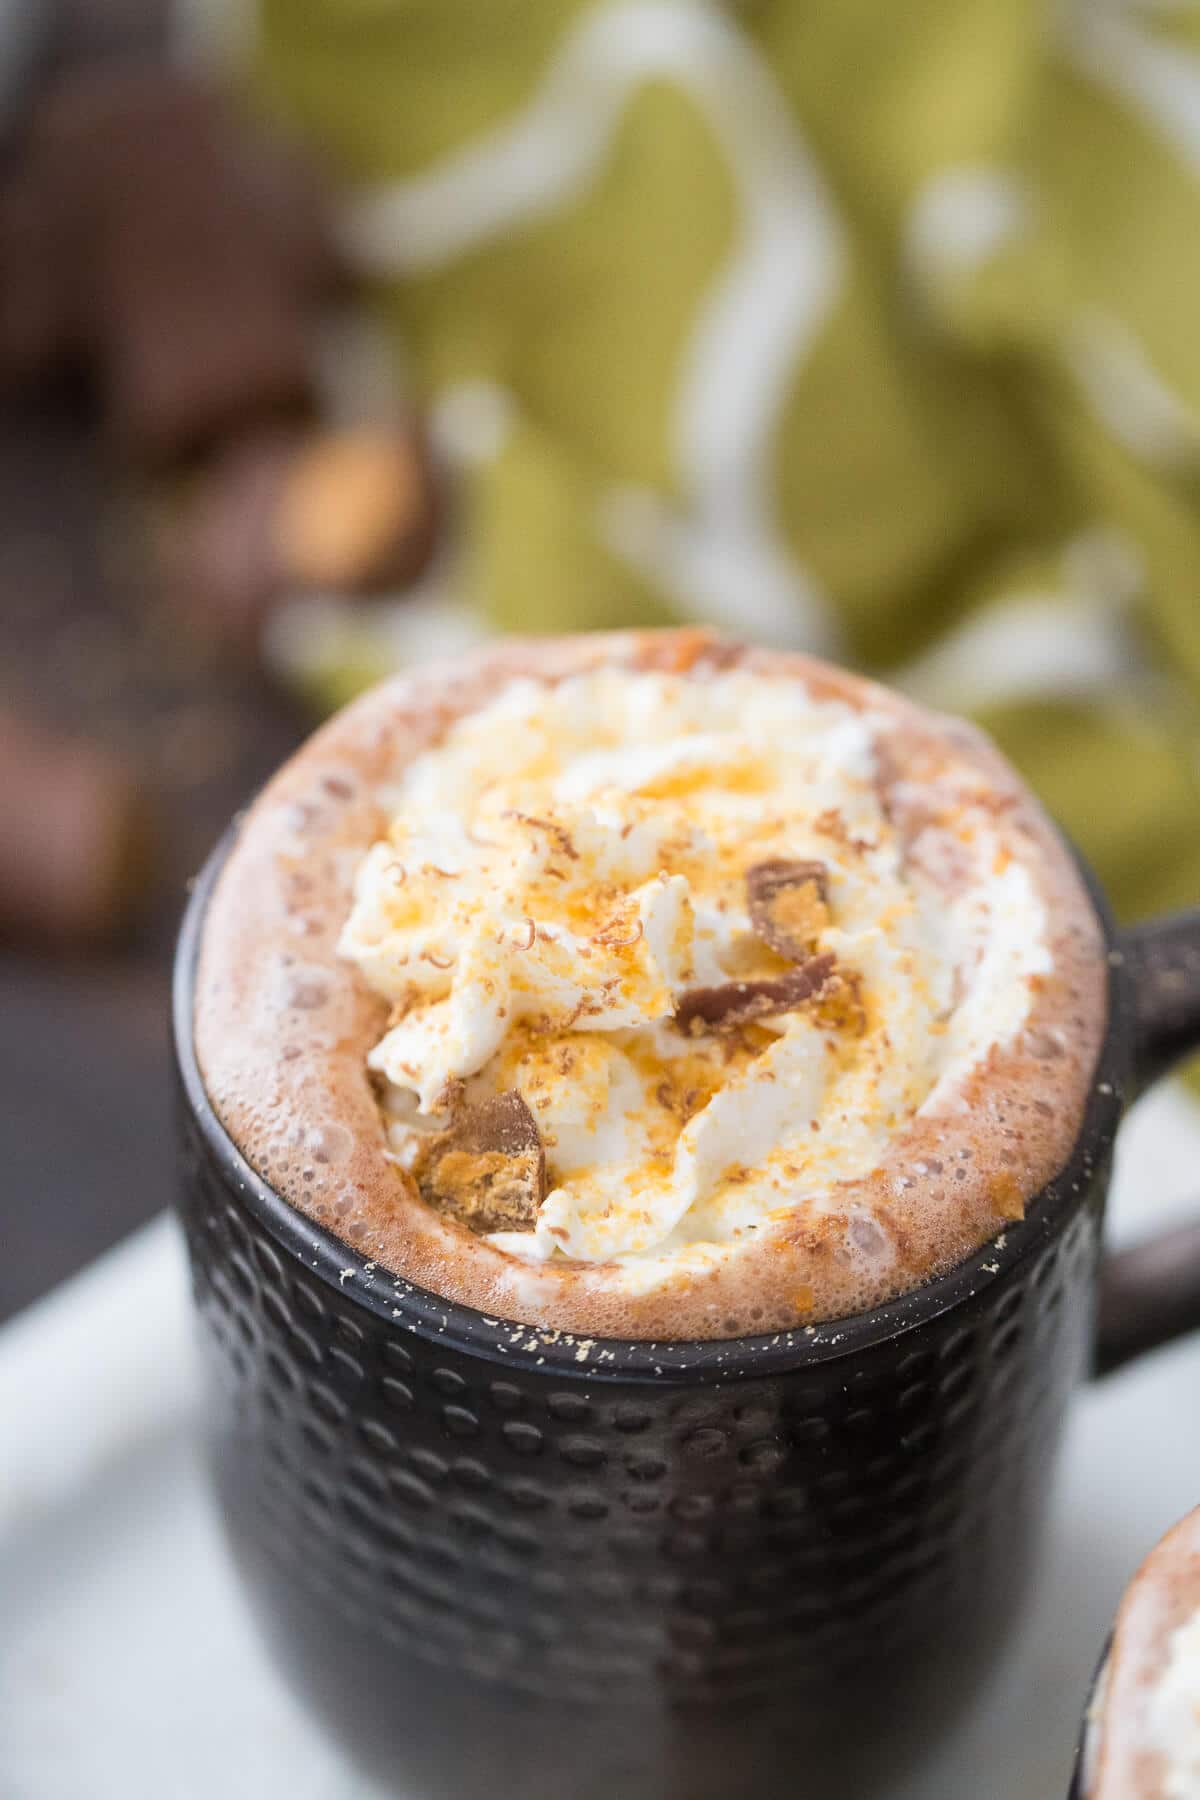 This a heck of boozy hot cocoa recipe! This hot chocolate tastes just like Butterfinger candy!